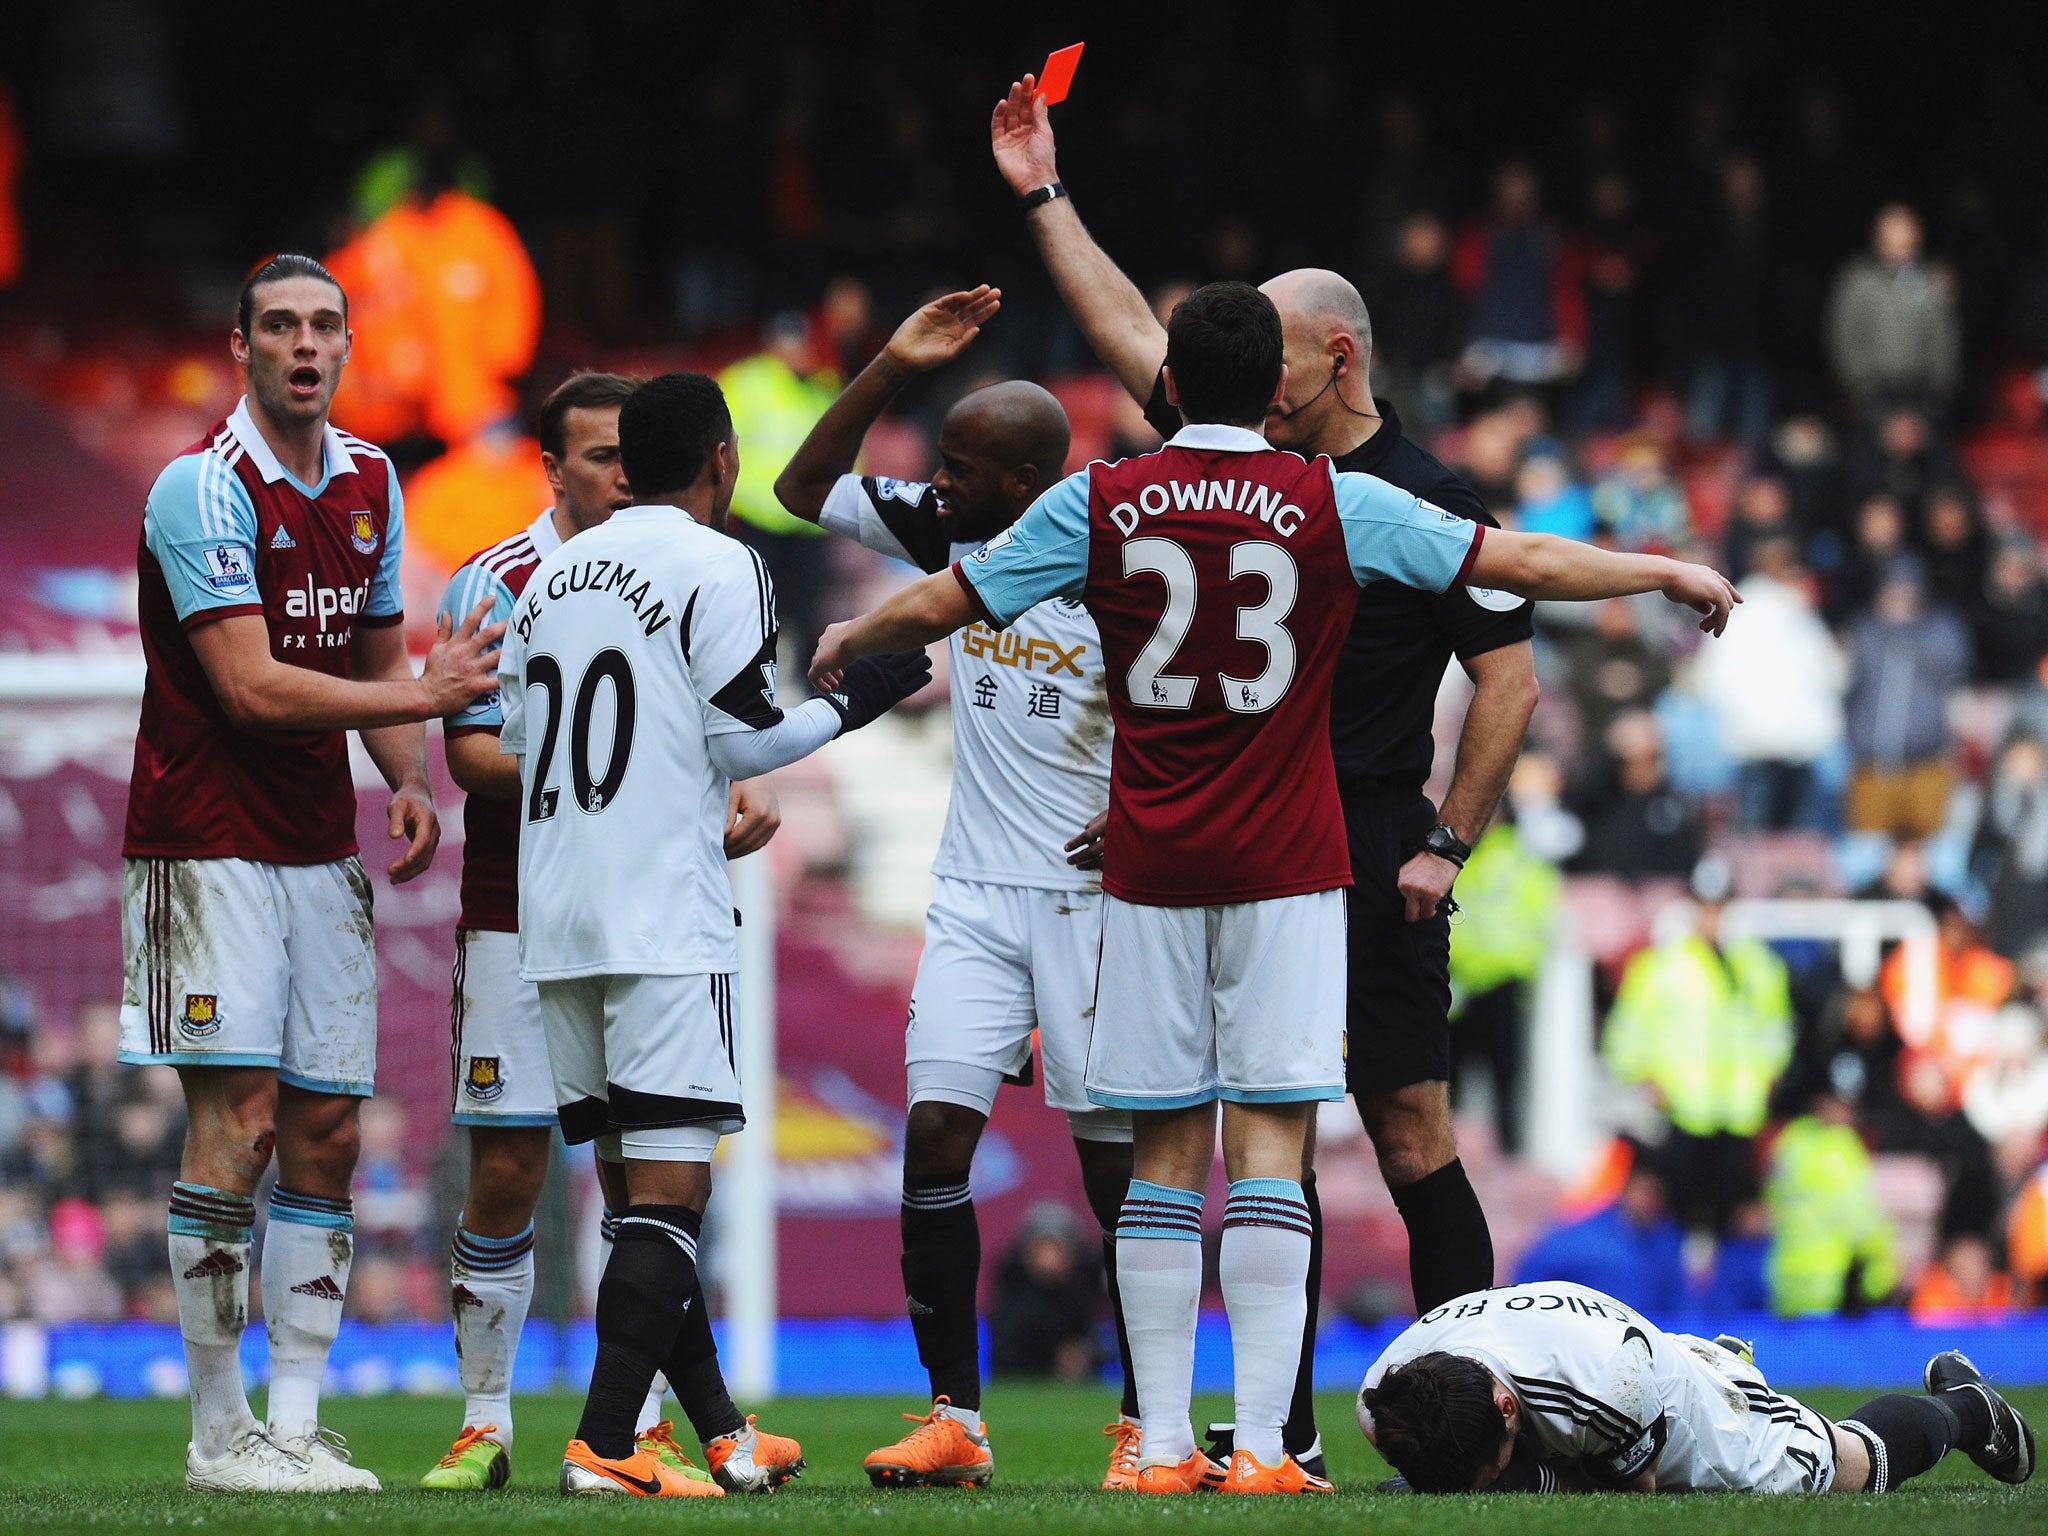 West Ham striker Andy Carroll is shown a red card